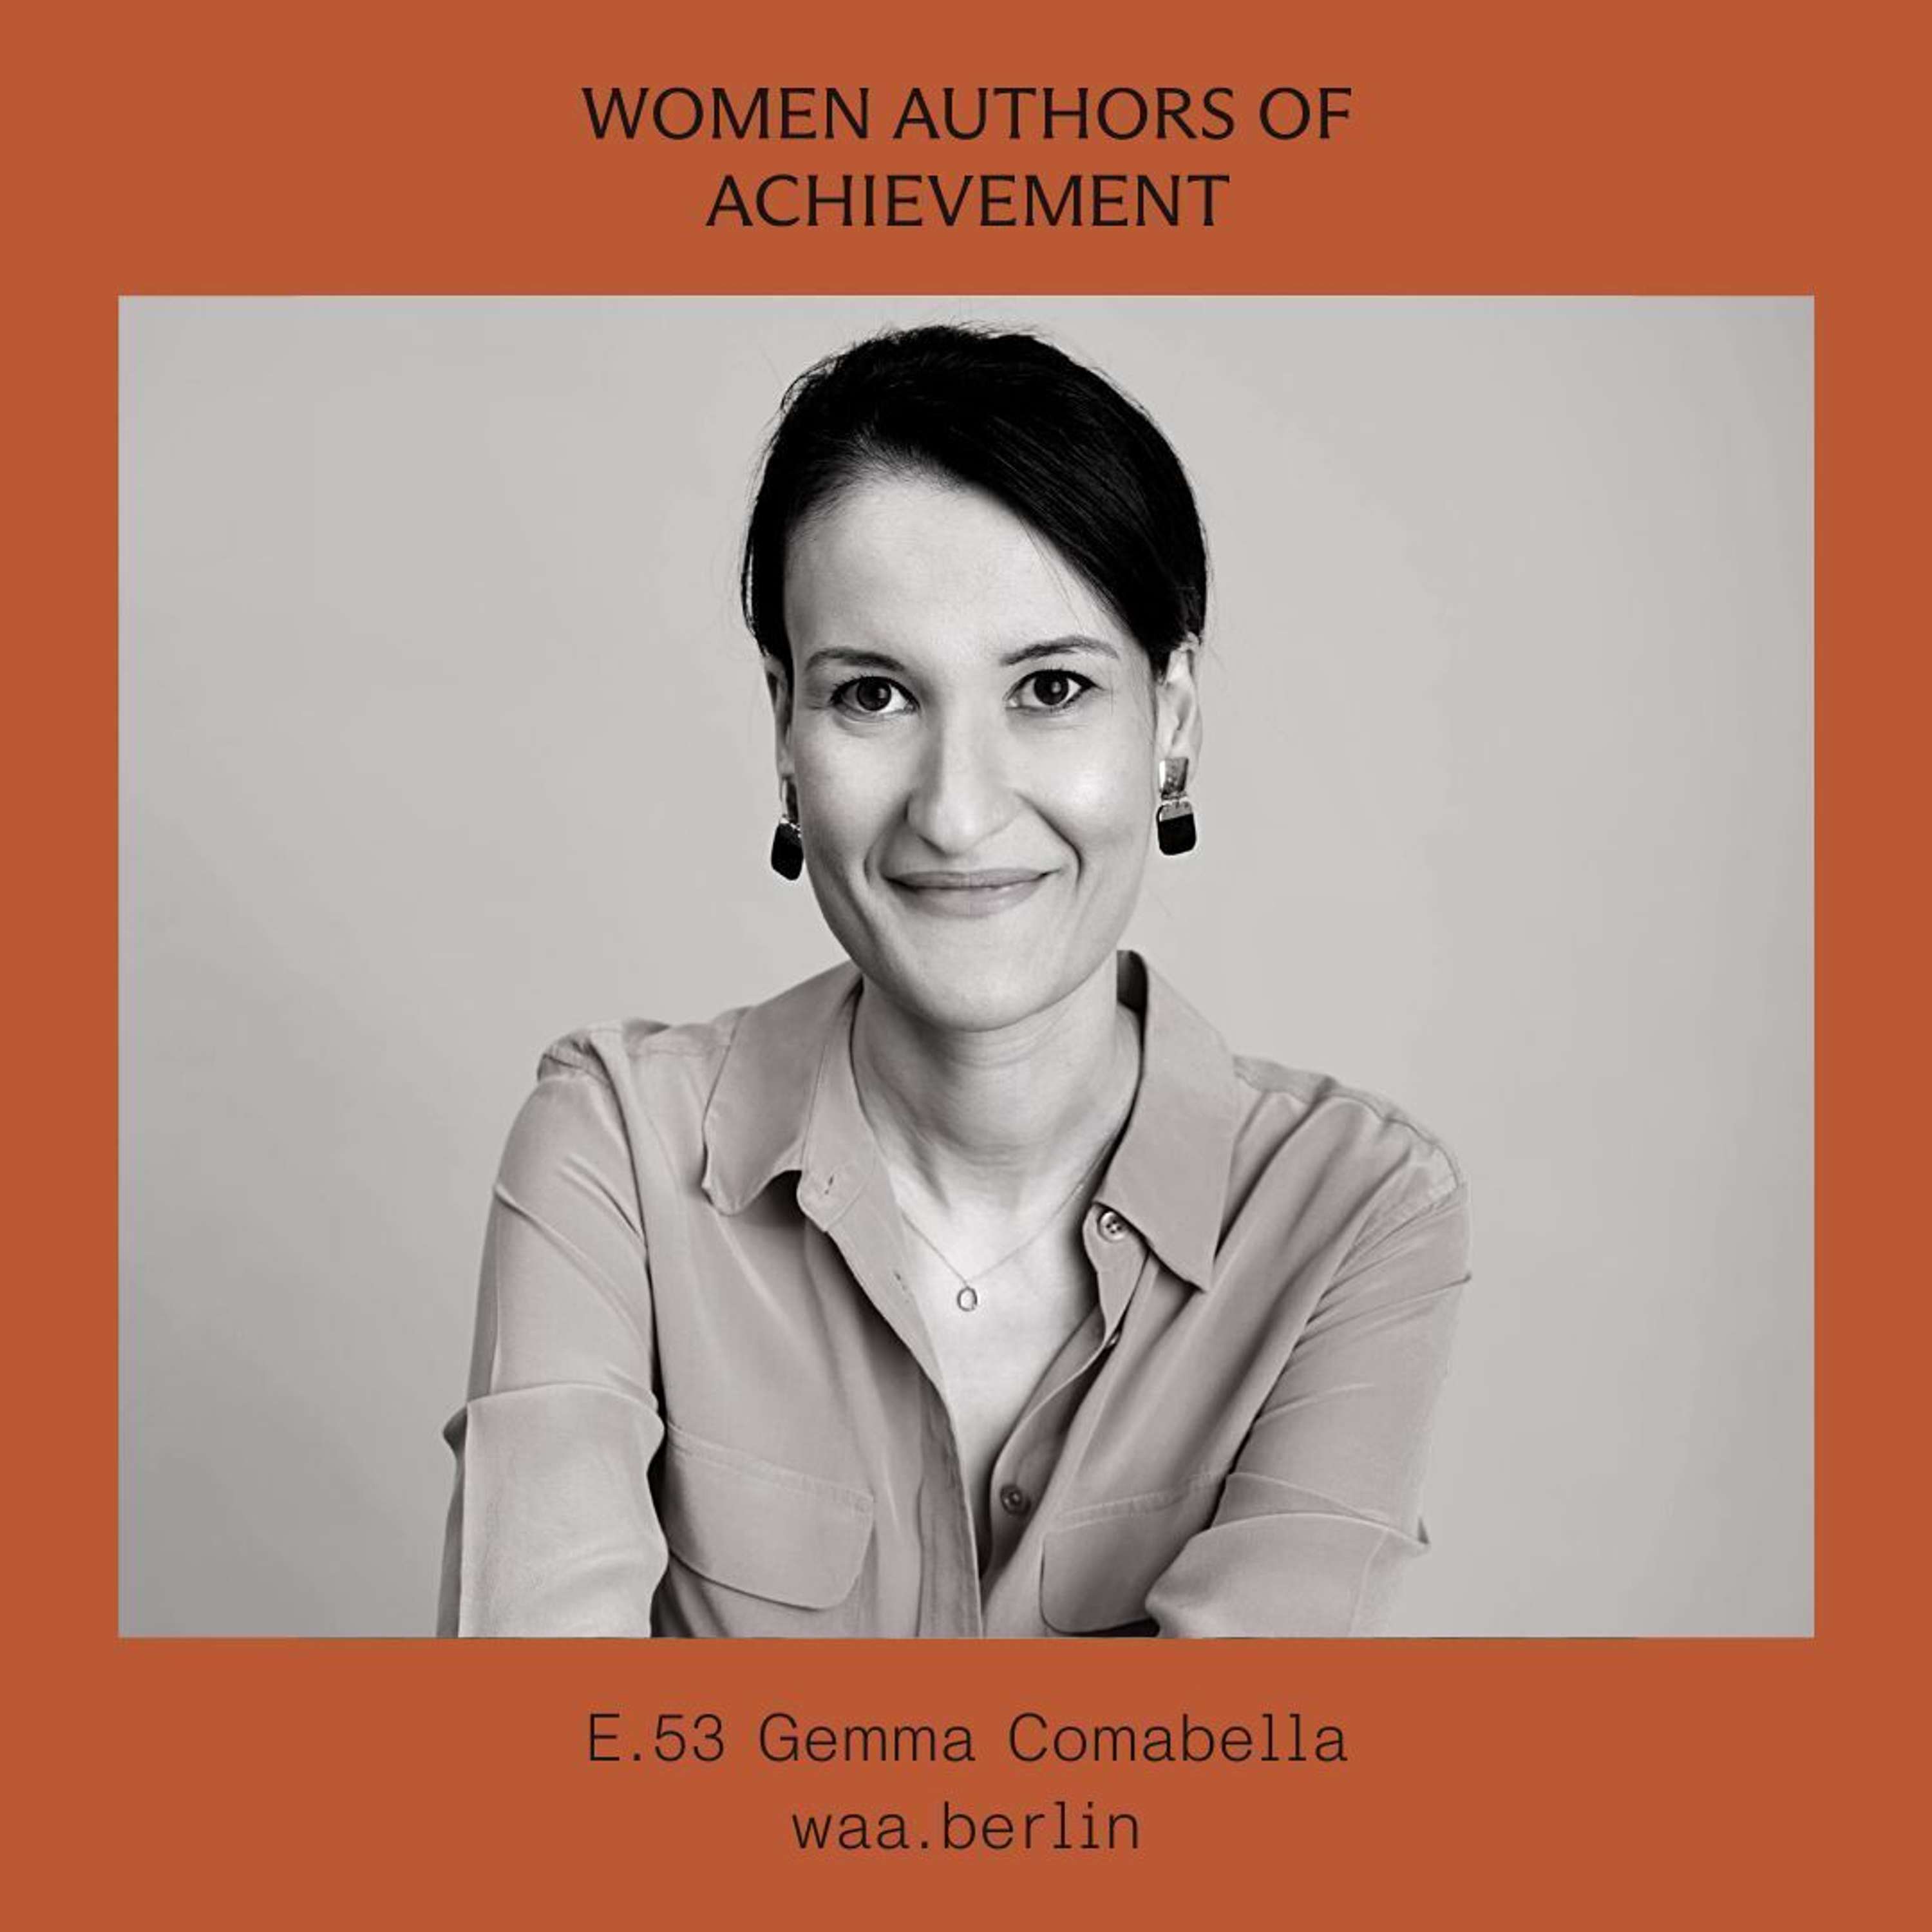 E.53 Reinventing the way we find and buy preloved furniture with Gemma Comabella